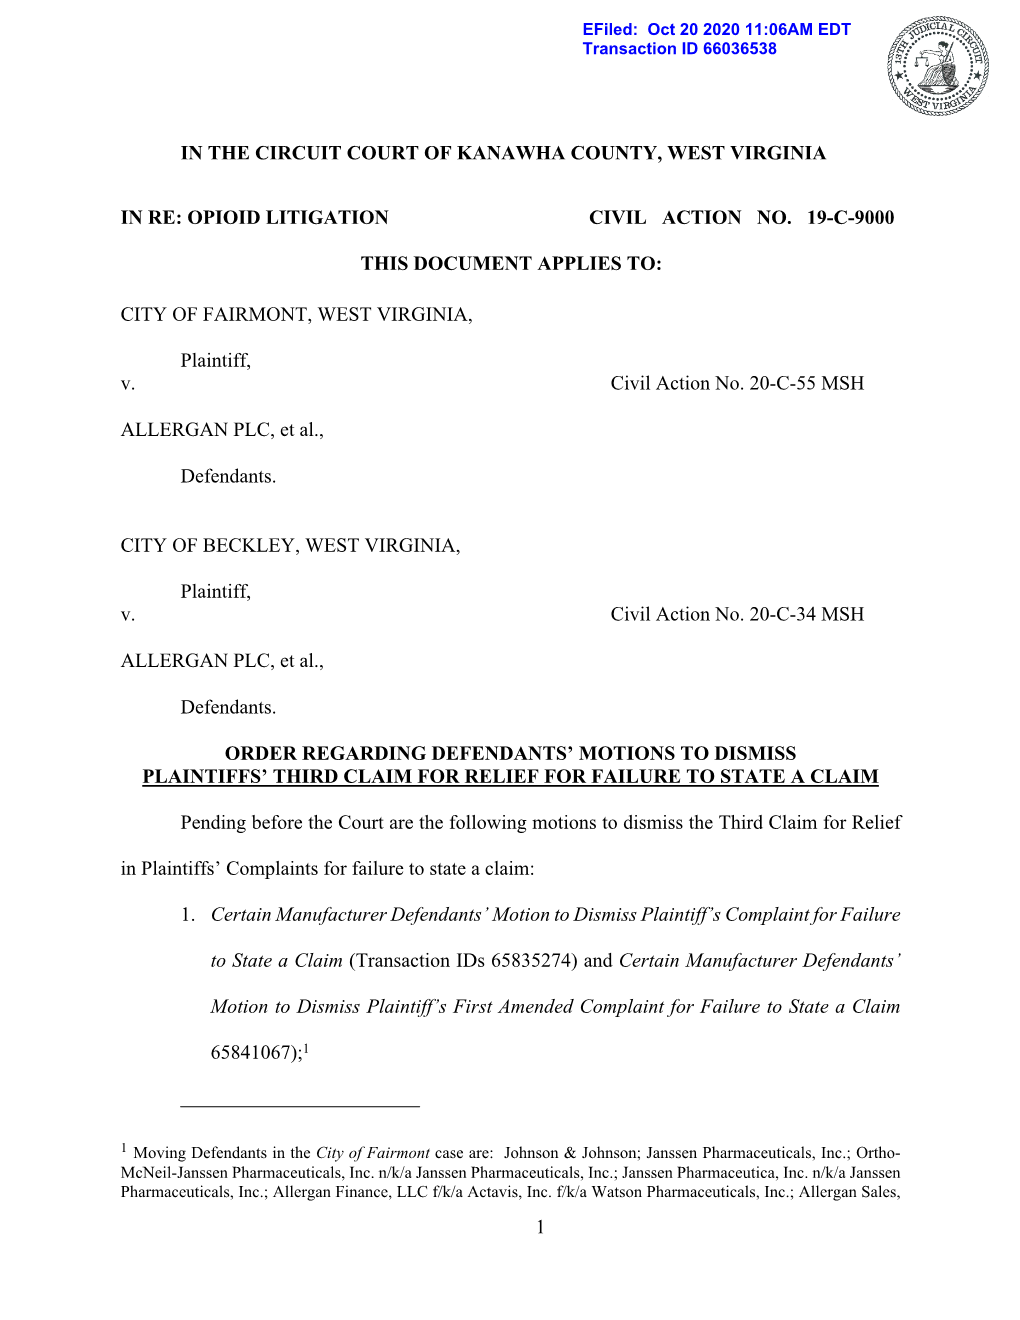 Order Regarding Defendants Motions to Dismiss Third Claim for Relief 10-20